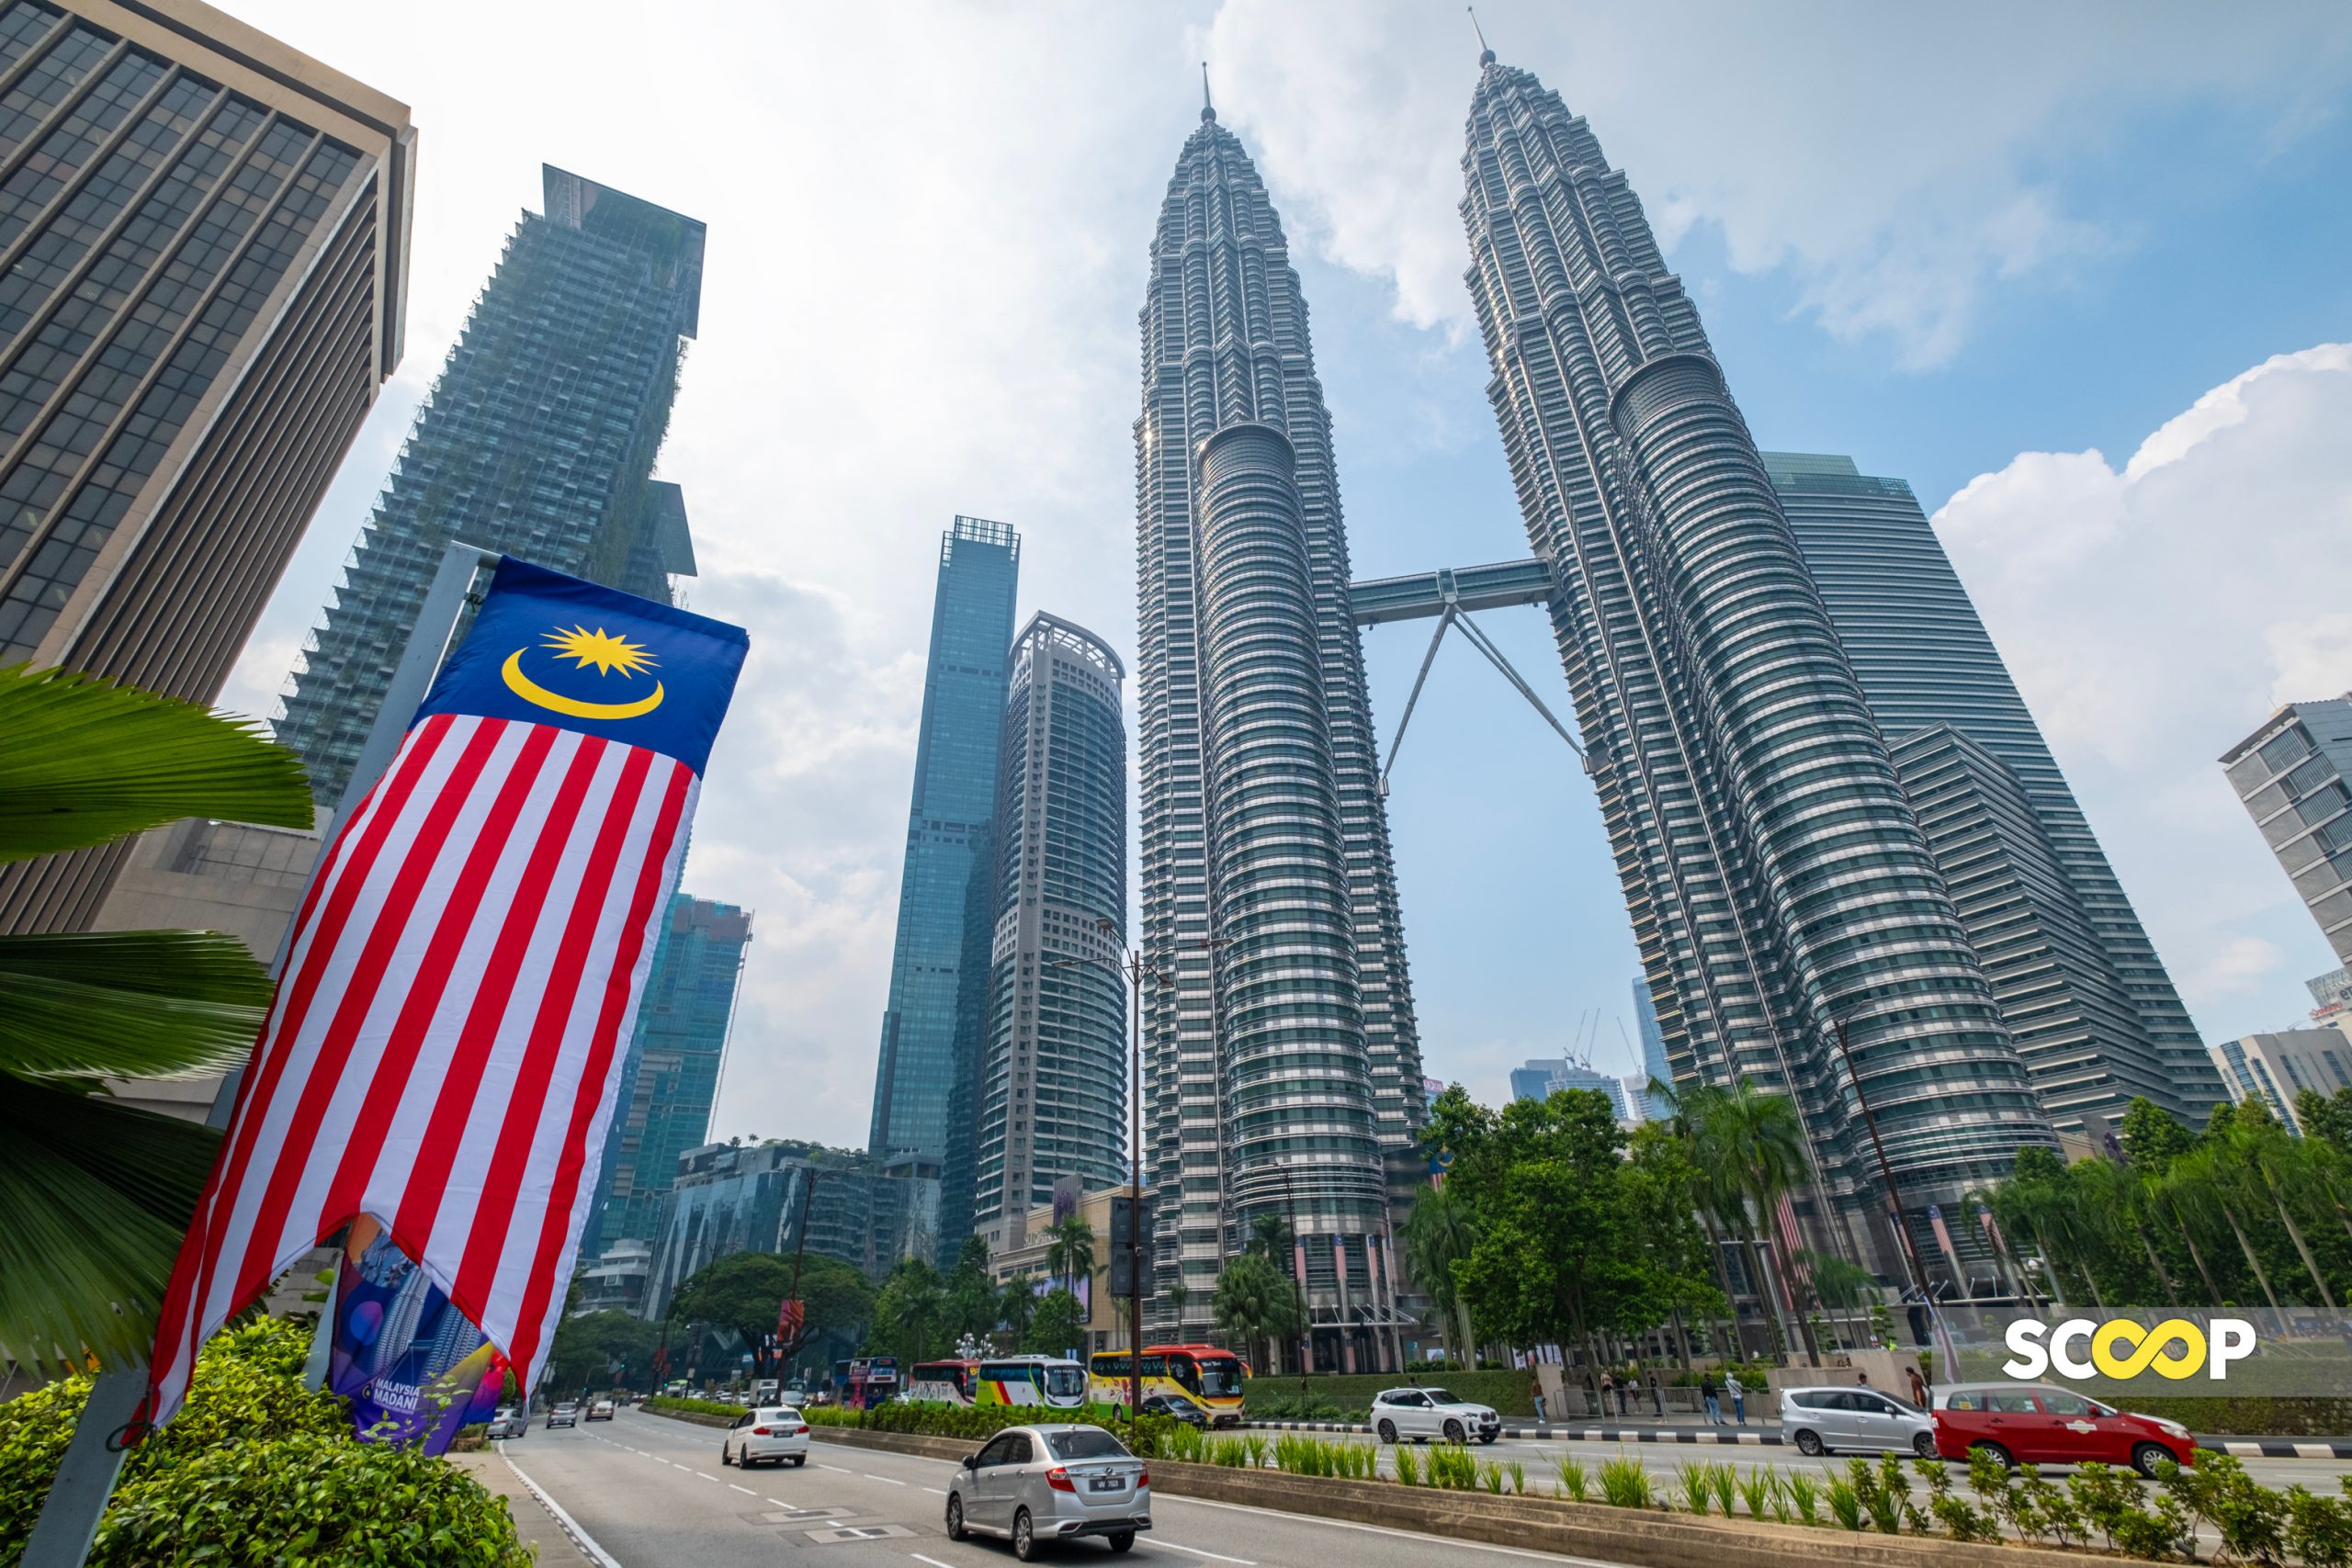 Thinking of moving to Malaysia? Govt relaxes MM2H rules to woo wealthy foreigners